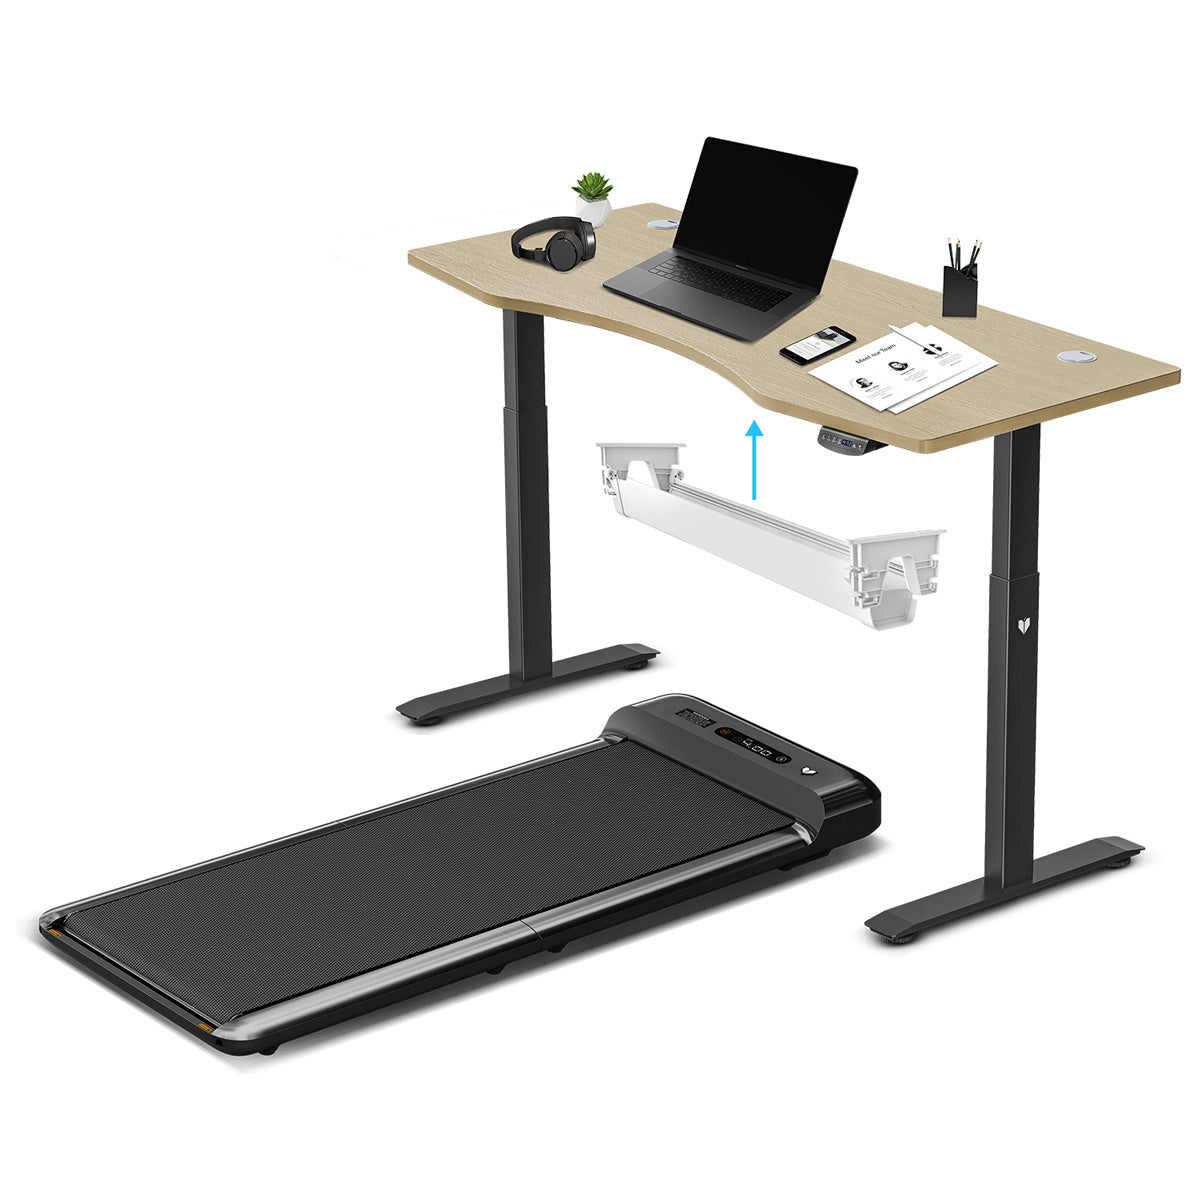 Lifespan Fitness WalkingPad M2 Treadmill with ErgoDesk Automatic Oak Standing Desk 1500mm + Cable Management Tray